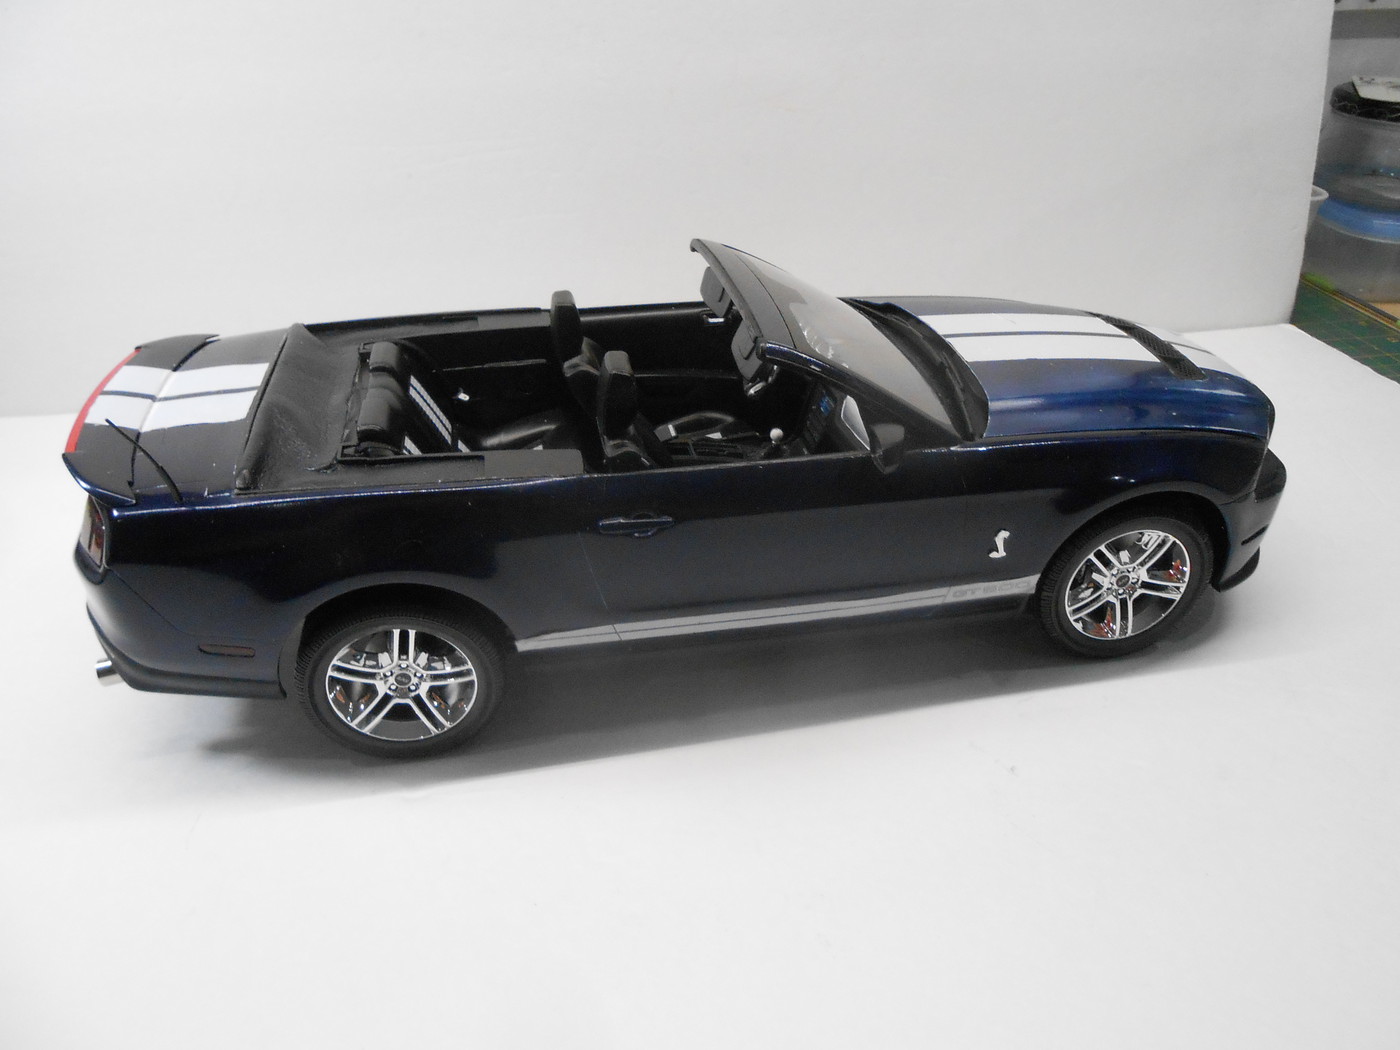 2010 SHELBY GT-500 CONVERTIBLE 1/12 2v2aHA6ogxaTfRW